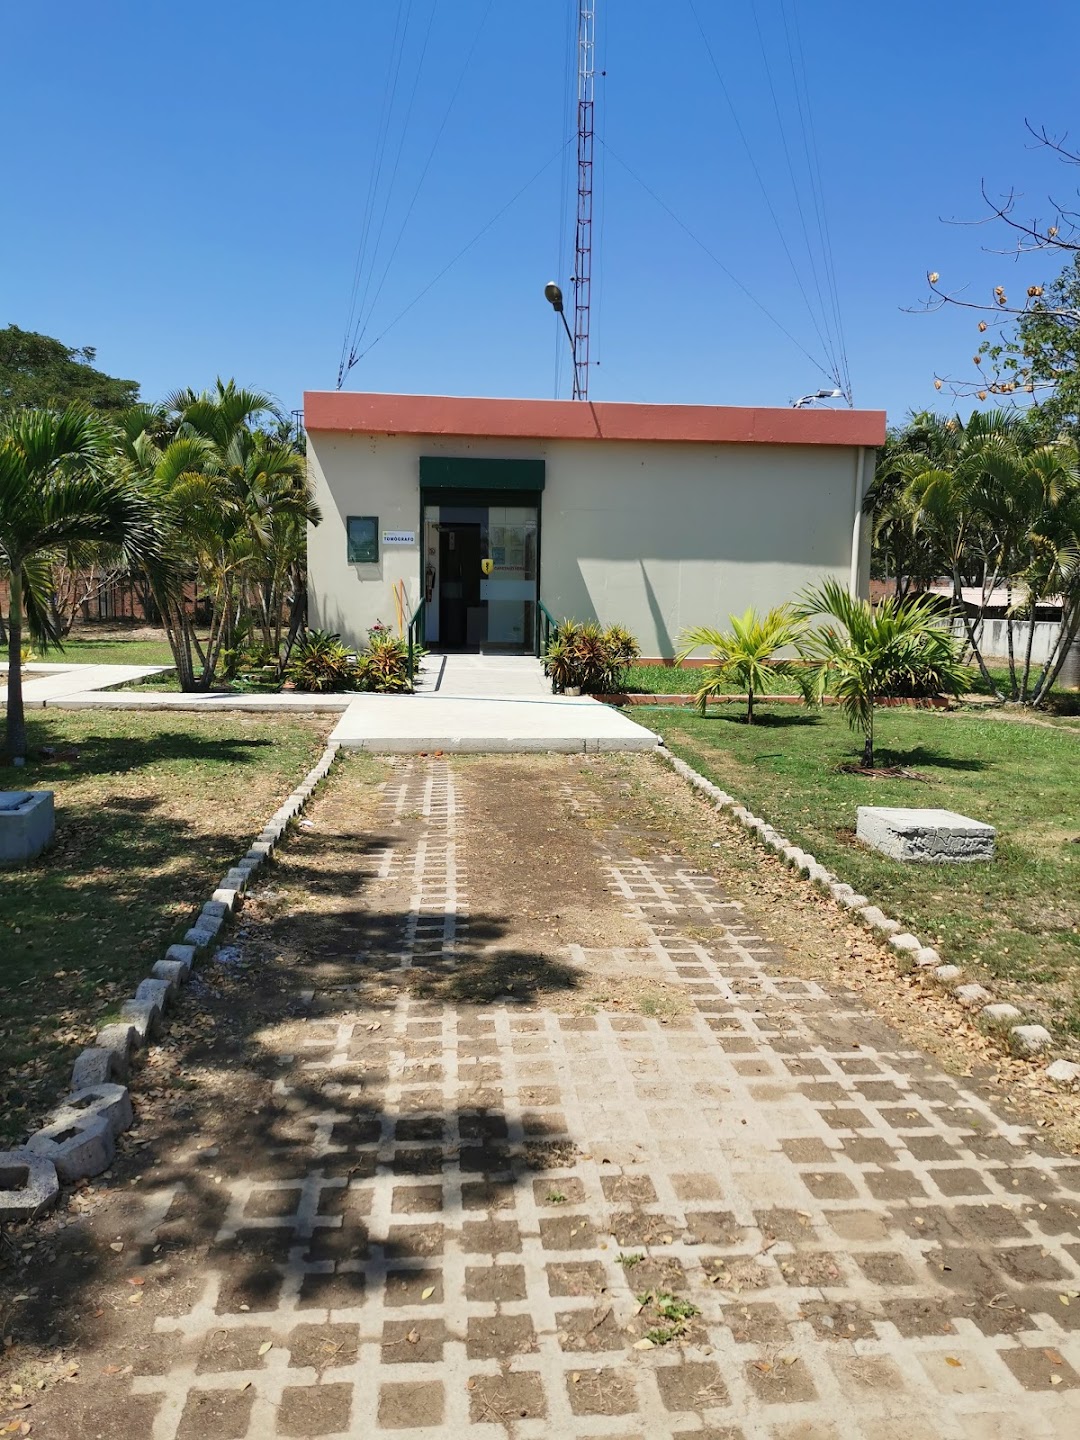 Centro de Salud Global, UPCH Tumbes